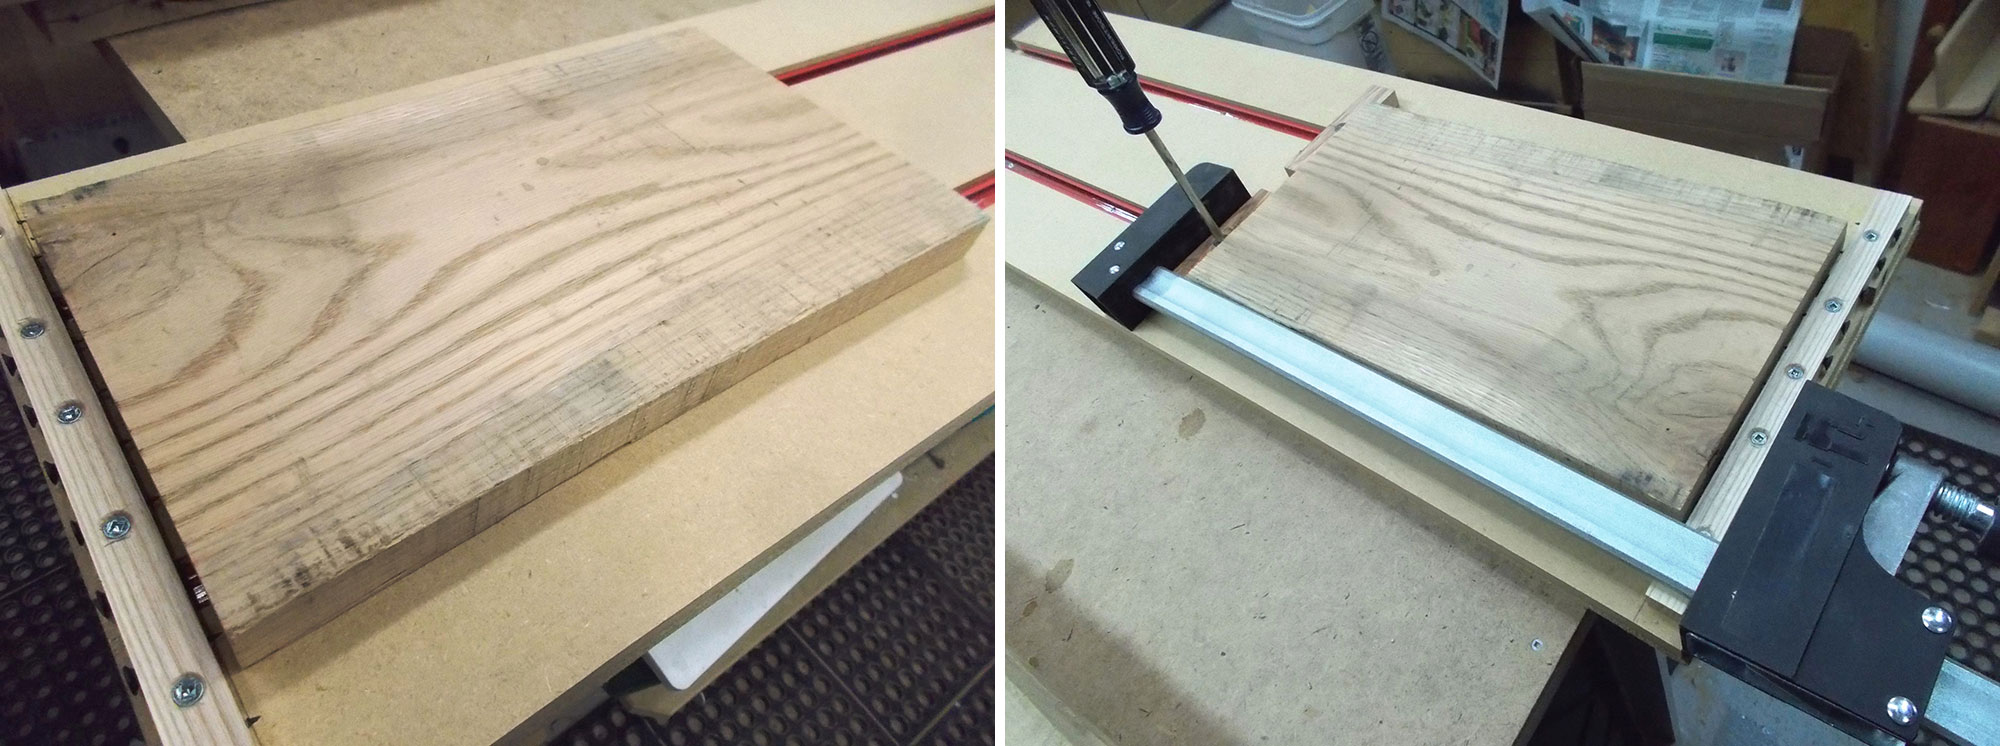 Image left: Blank on top of the bed. Image right: Blank on bed with screwdriver.